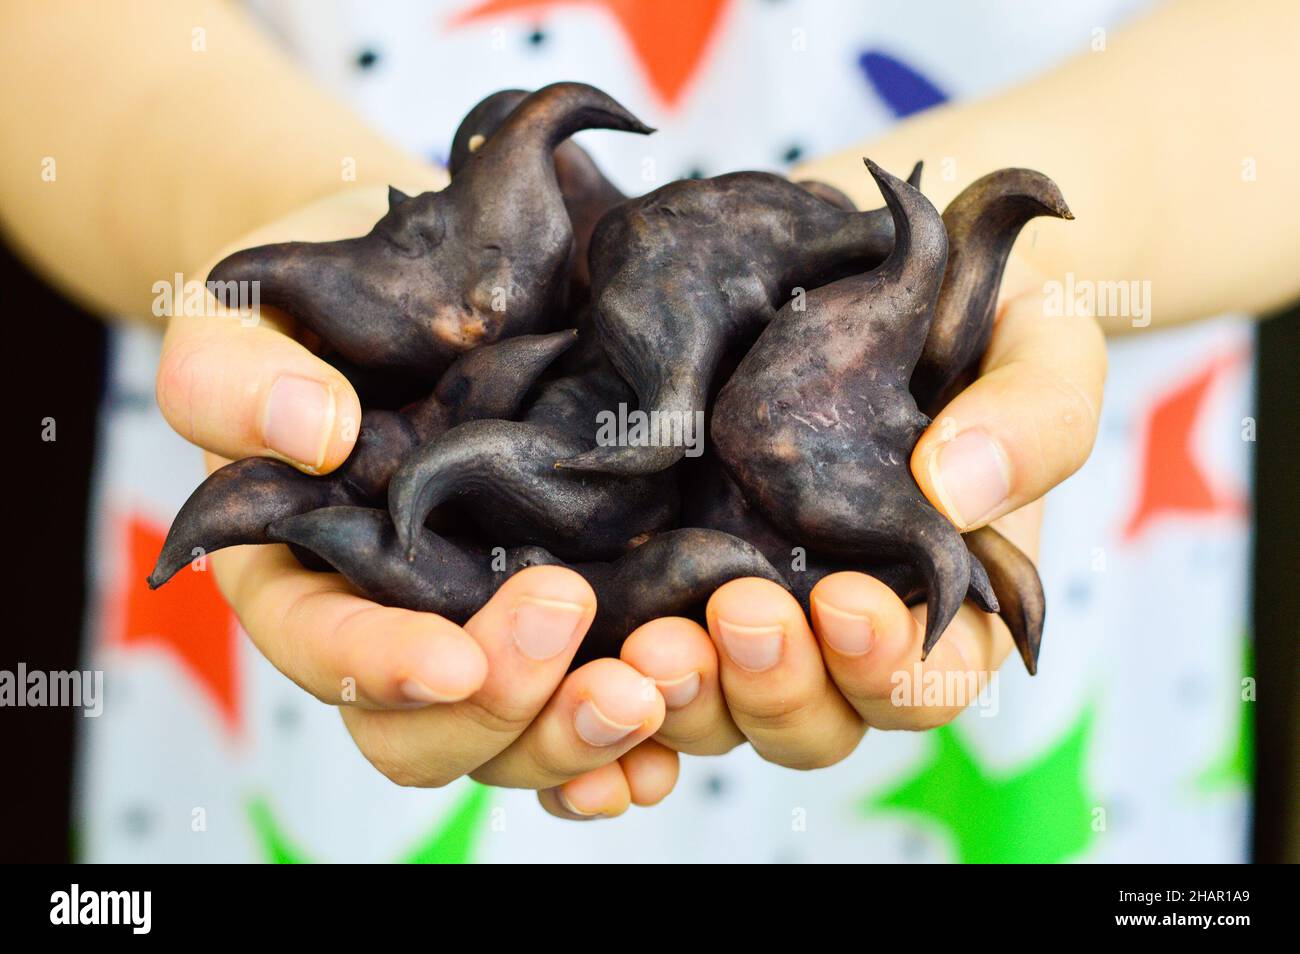 Two hands holding Chinese ling jiao (water caltrop). Stock Photo